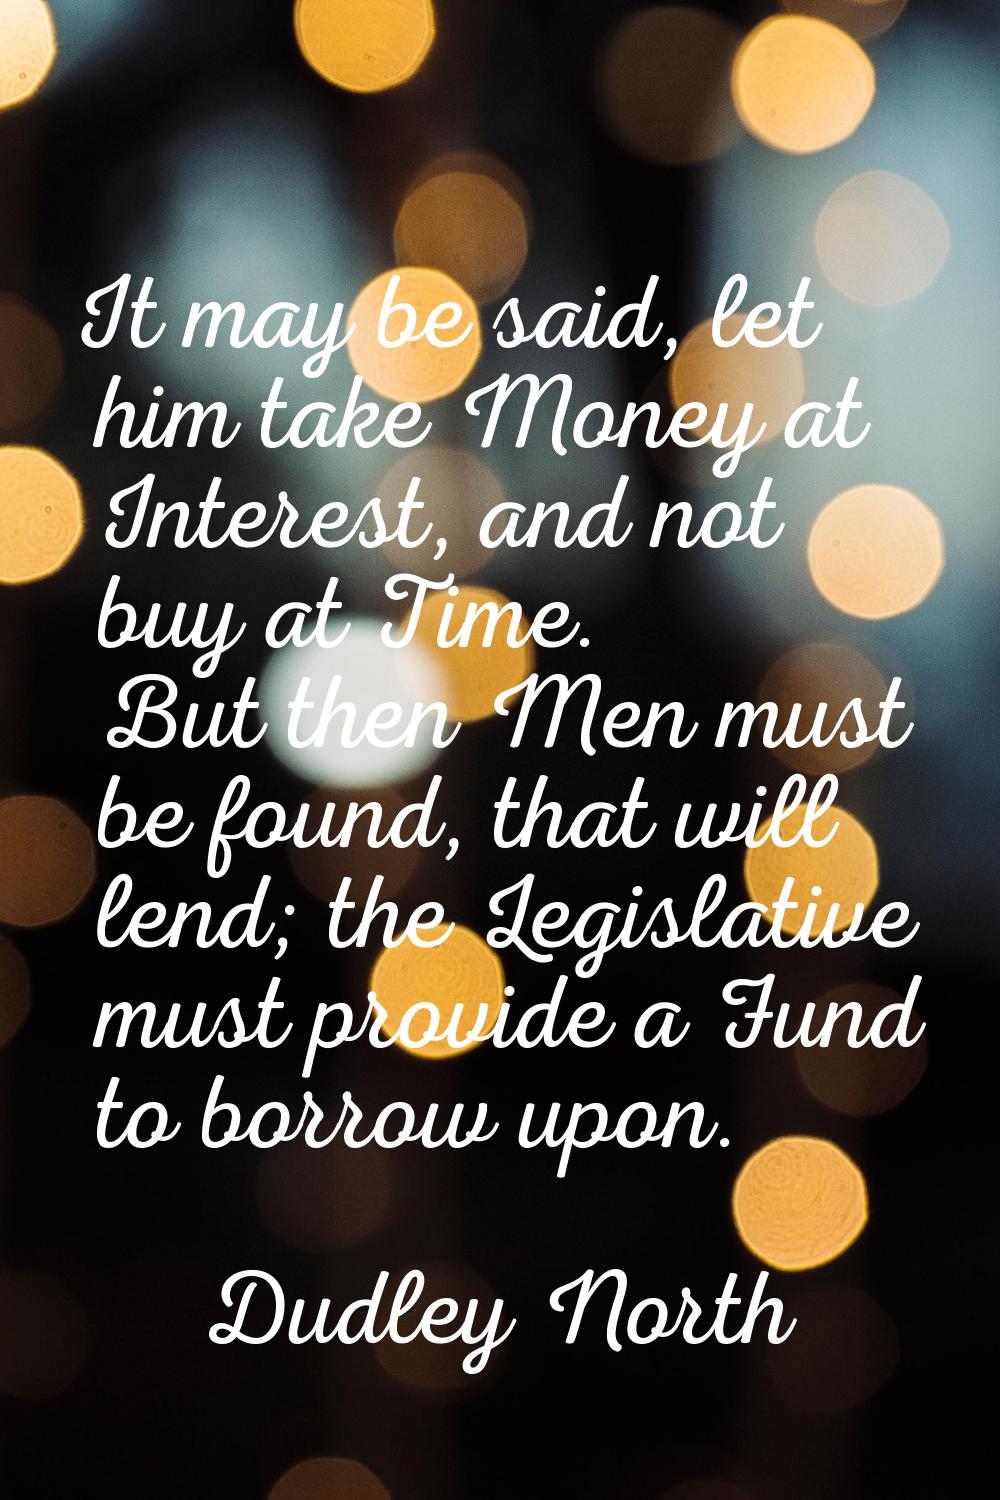 It may be said, let him take Money at Interest, and not buy at Time. But then Men must be found, th